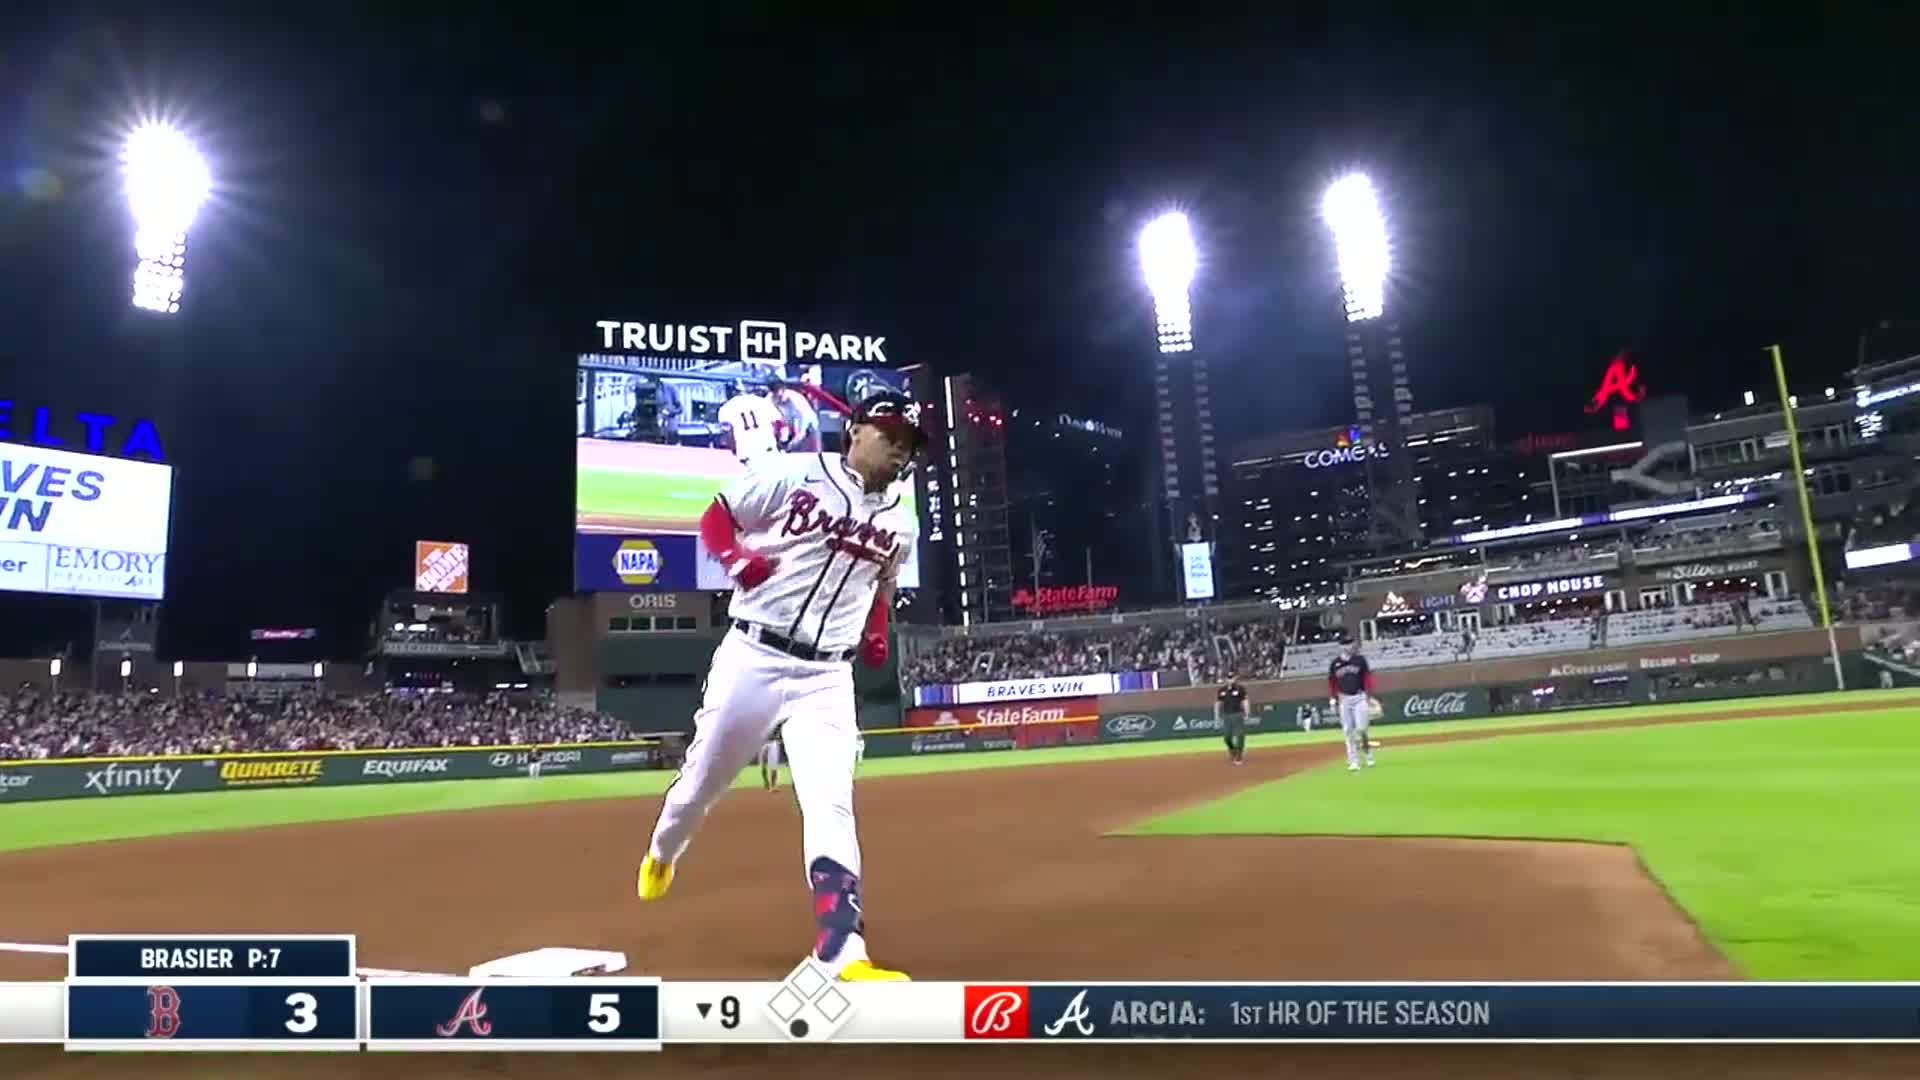 Orlando Arcia and the Braves walk-off the Red Sox with a homer.